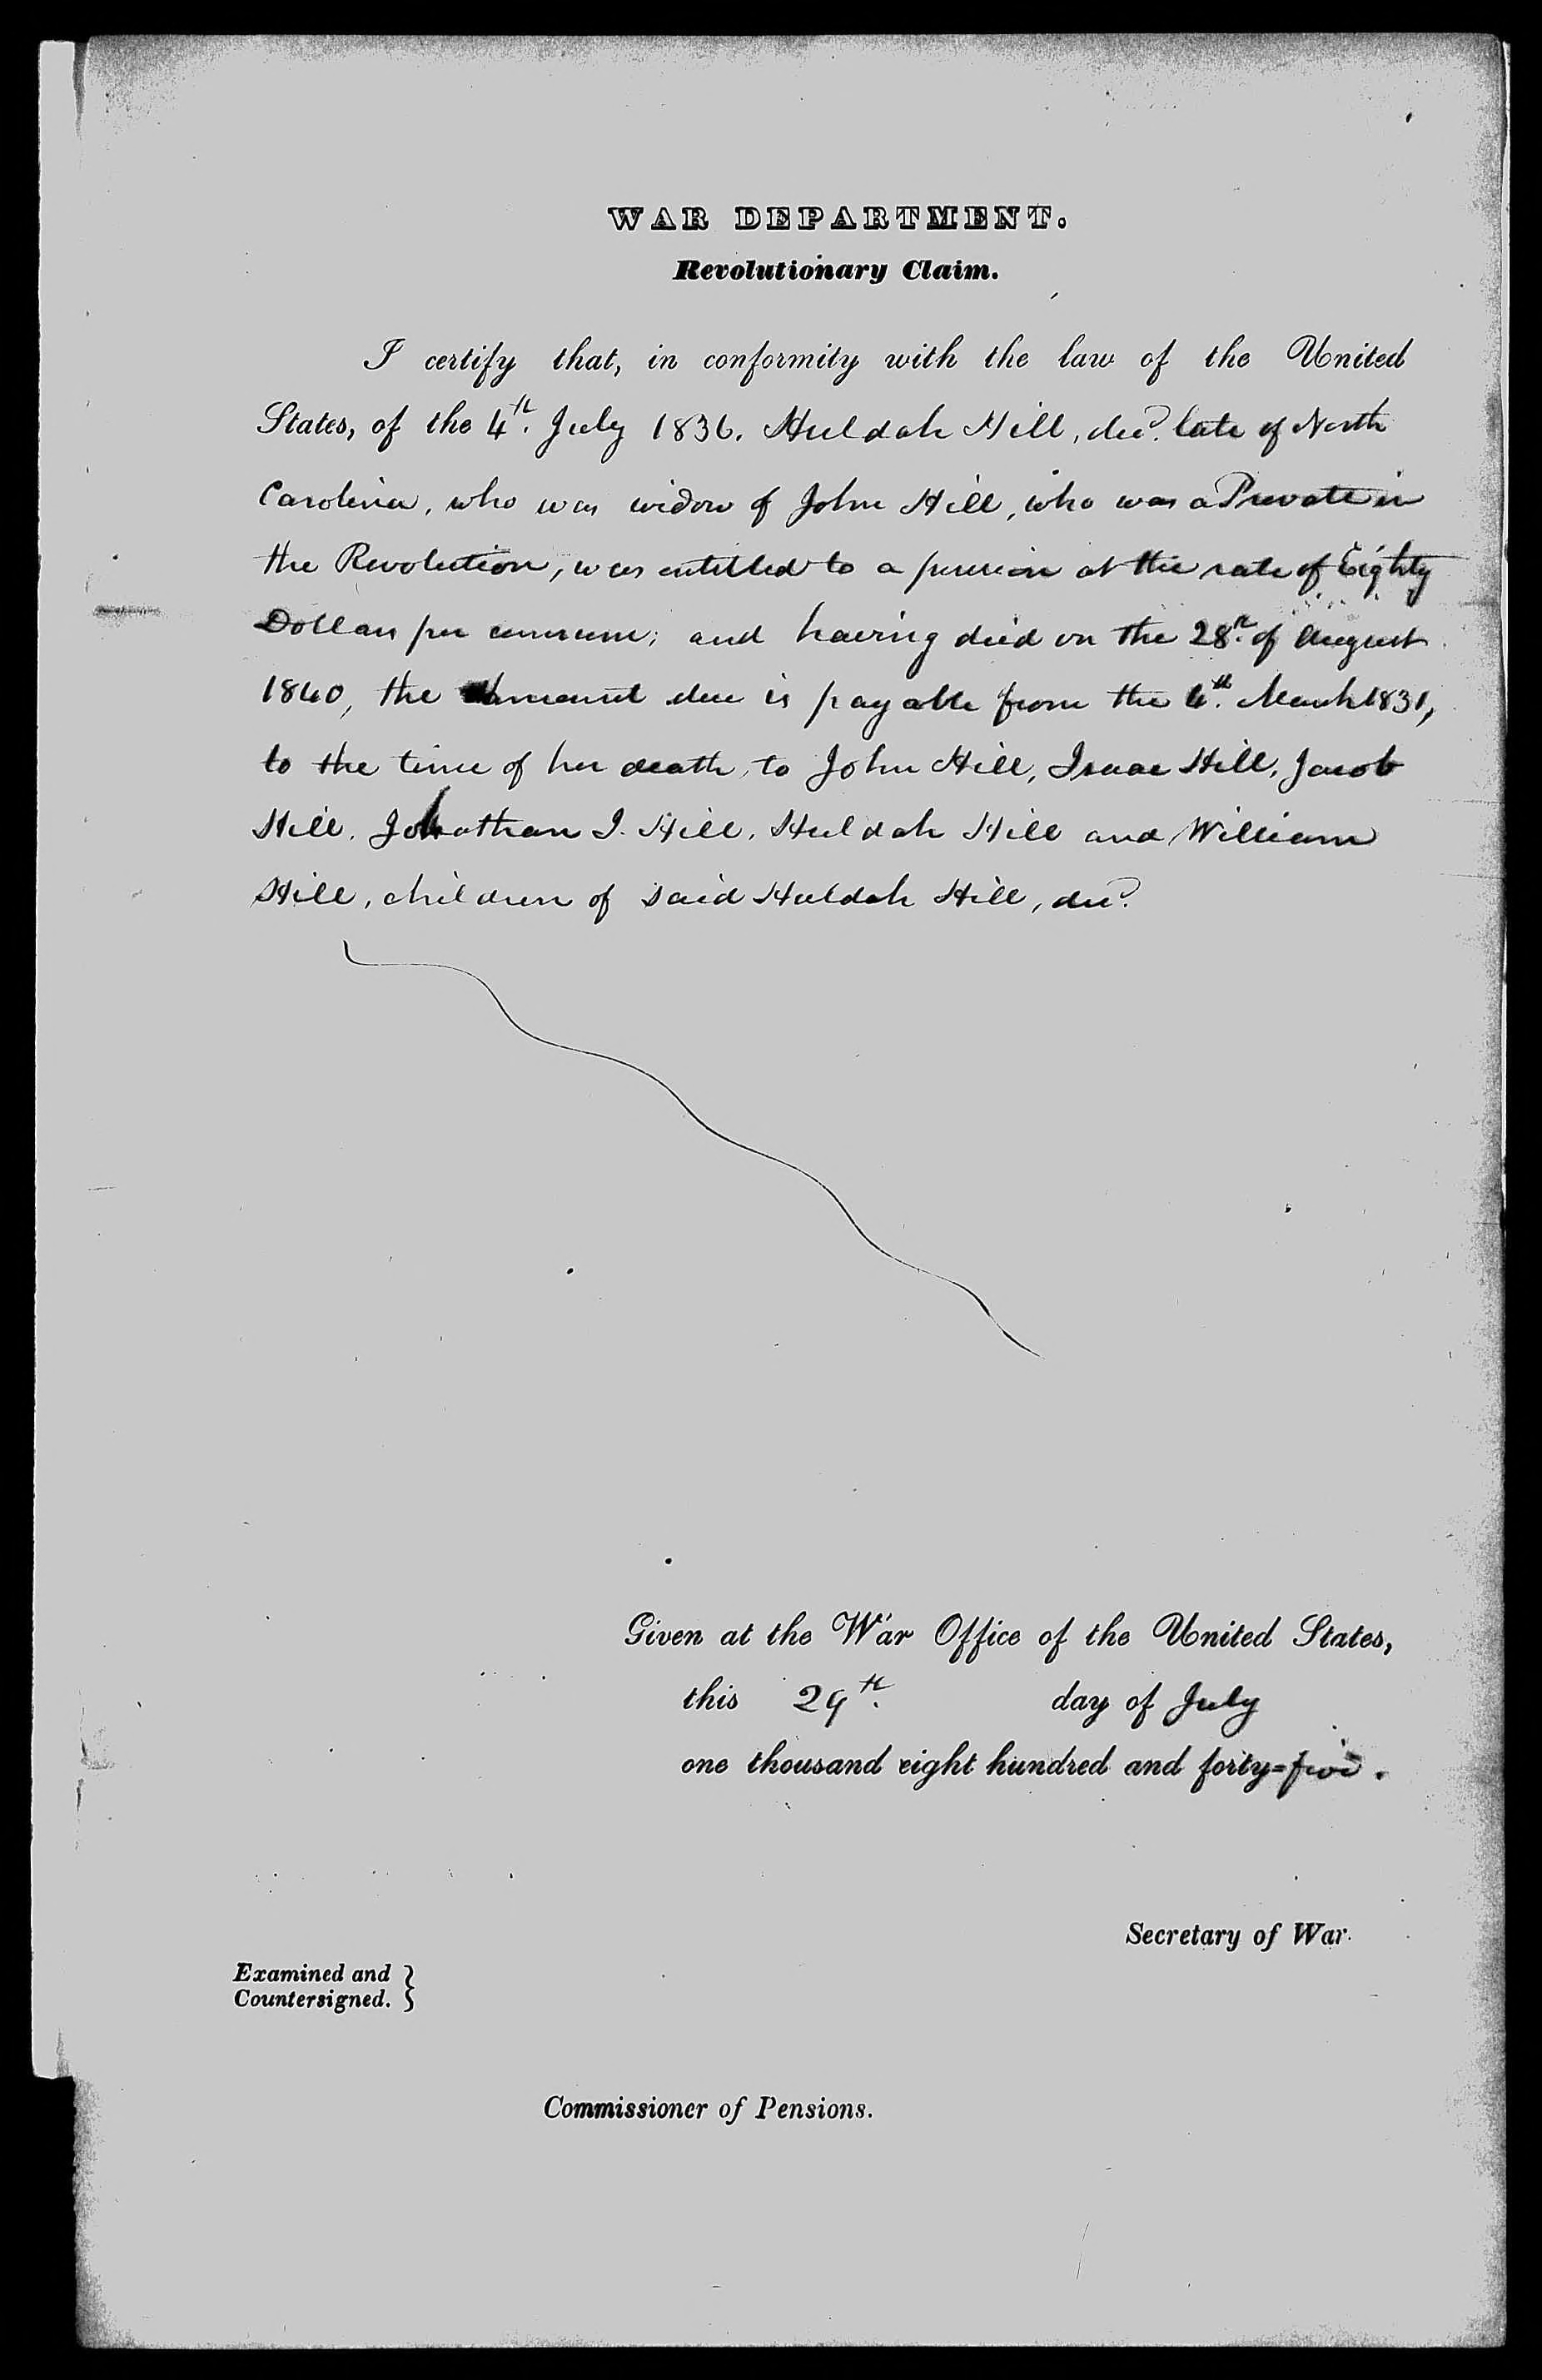 Order from William Learned Marcy on the Pension Claim of Huldah Hill, 29 July 1845